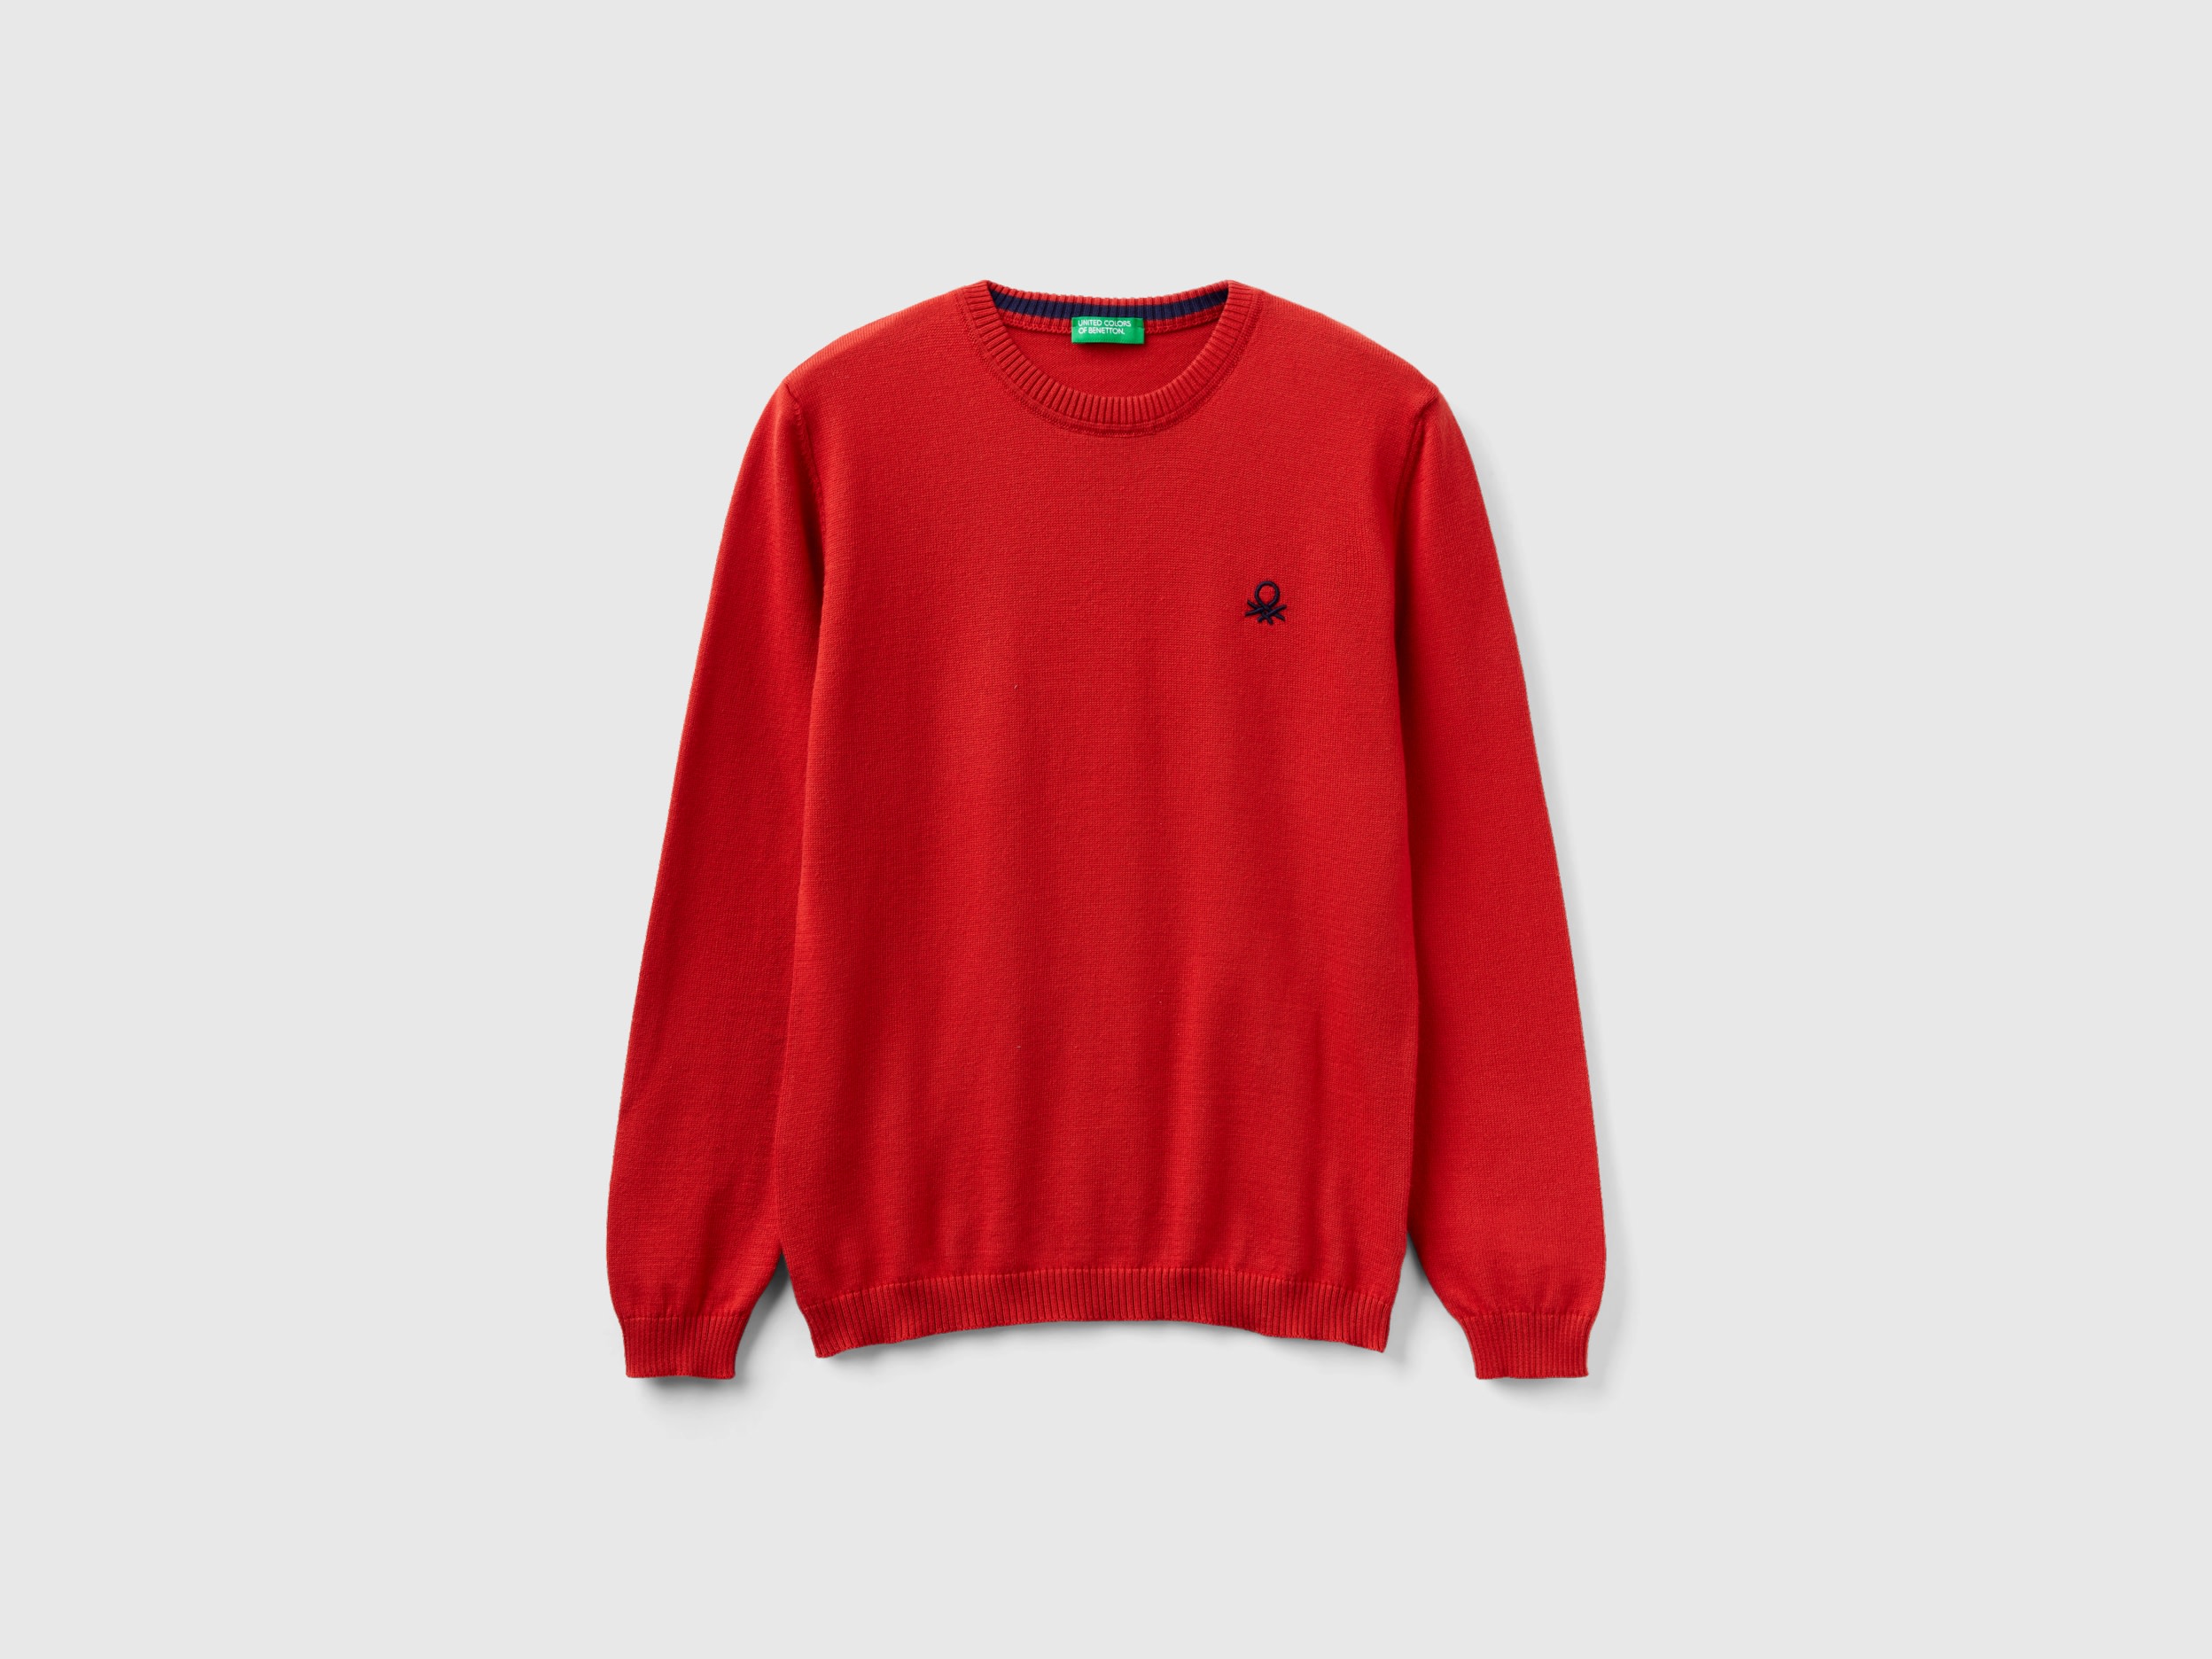 Benetton, Sweater In Pure Cotton With Logo, size S, Brick Red, Kids